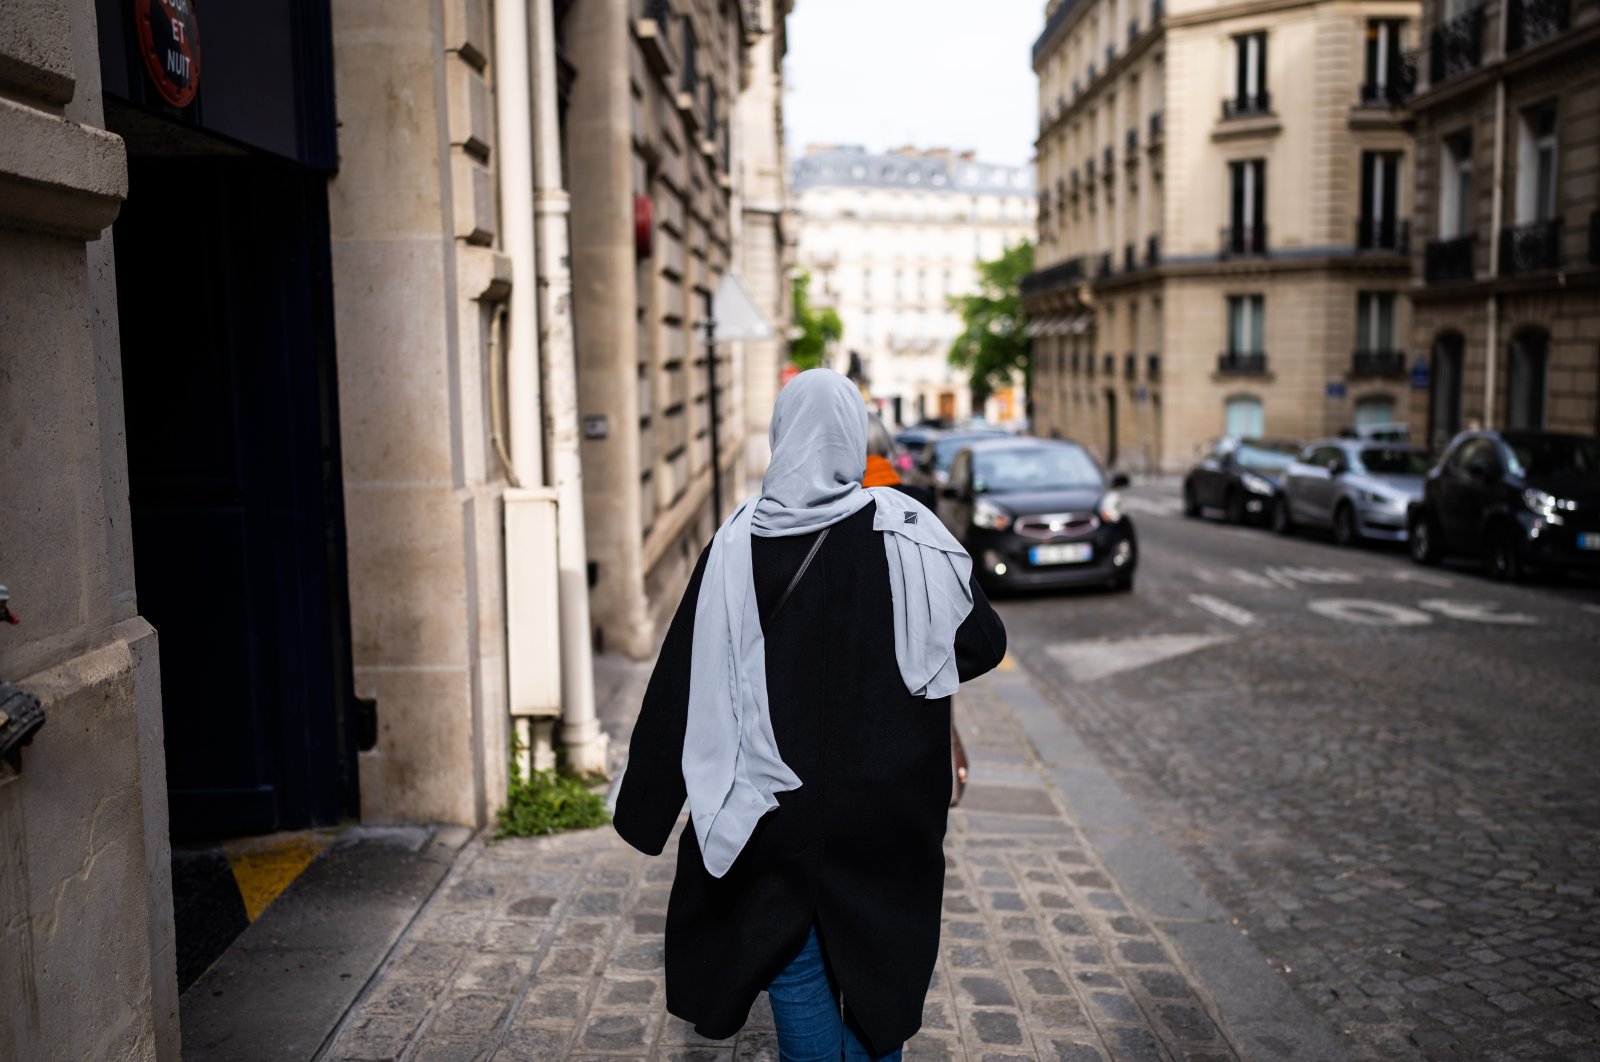 A Muslim woman wearing a headscarf walks with her back to the camera on the sidewalk in Paris, France, April 28, 2022. (Reuters File Photo)